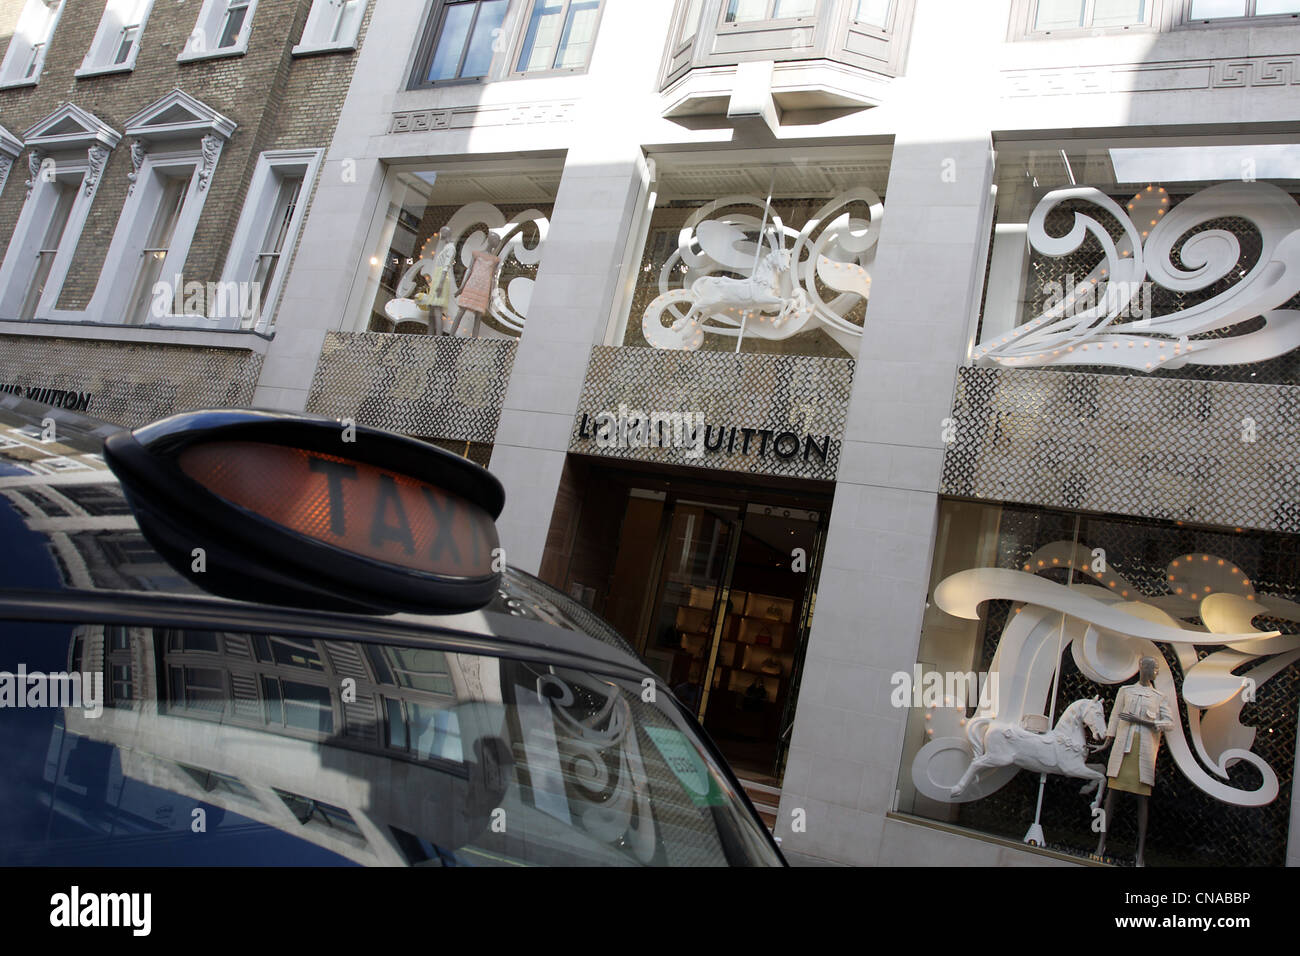 Louis Vuitton's New Boutique in Lille Was Once a Mecca for Oysters – WWD